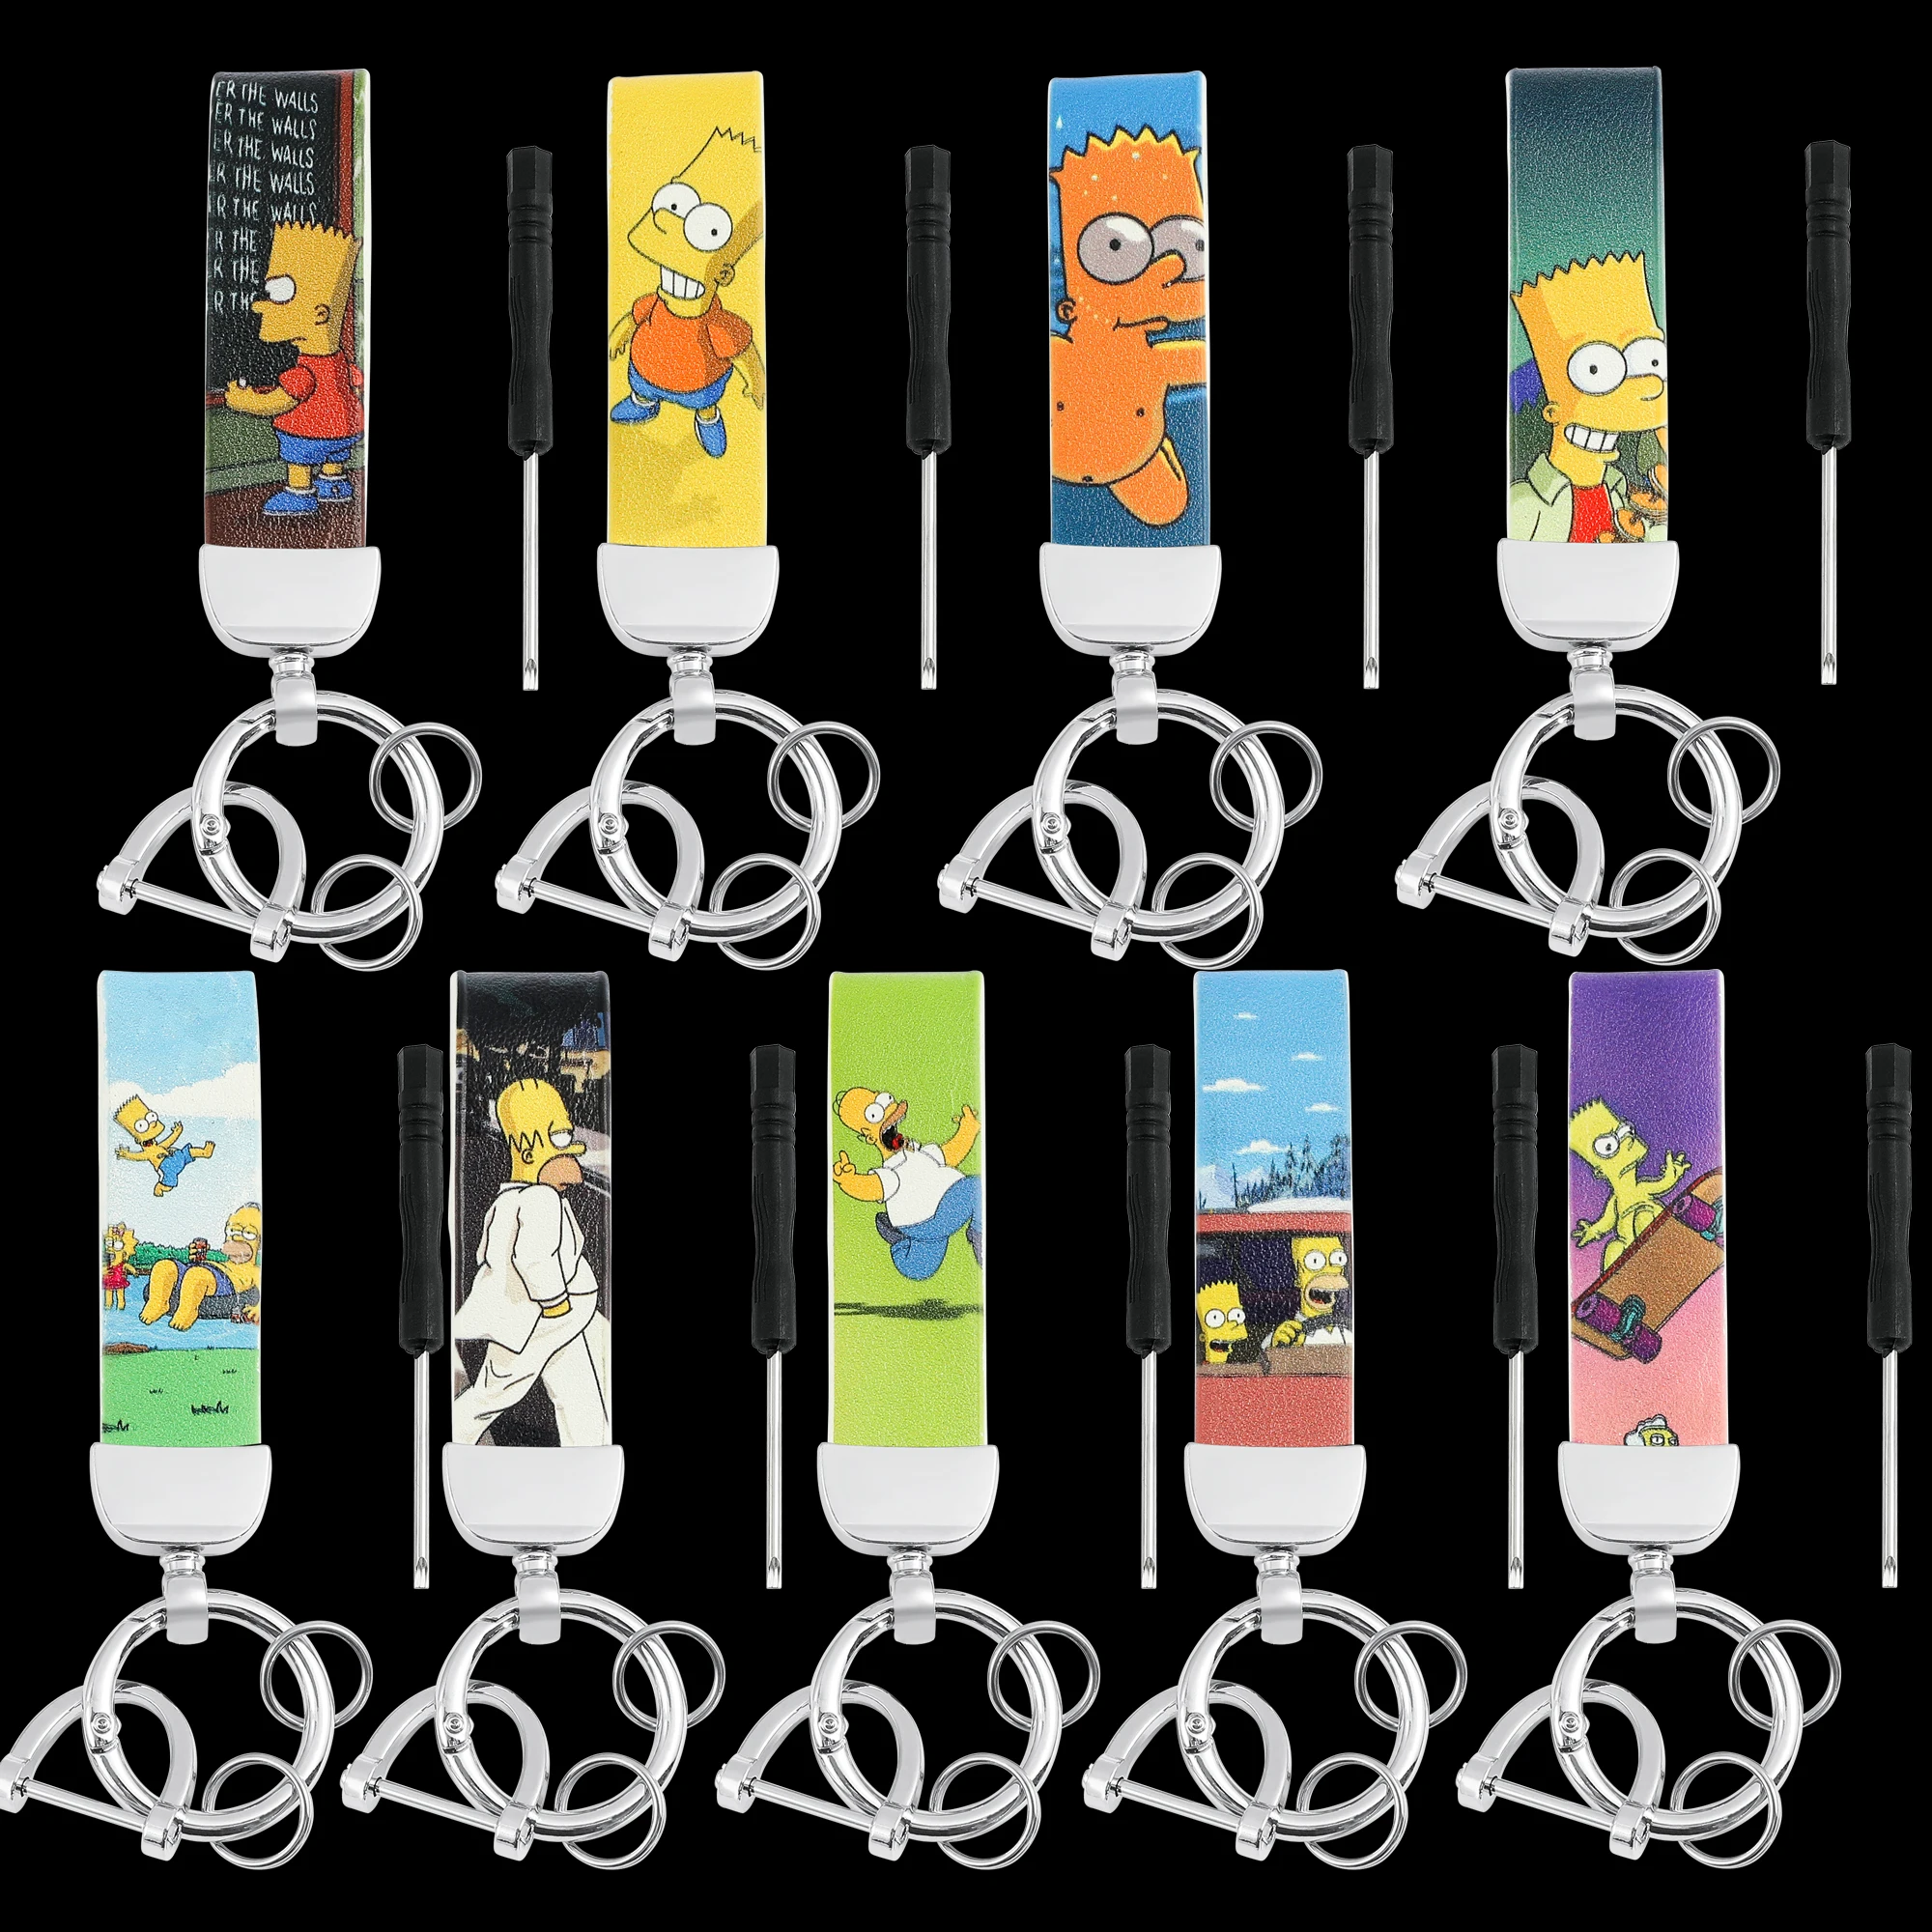 

Disney Anime The Simpsons Leather Keychain Cartoon Figure Bart Simpson Keyring for Backpack Car Key Holder Accessories Kids Toys